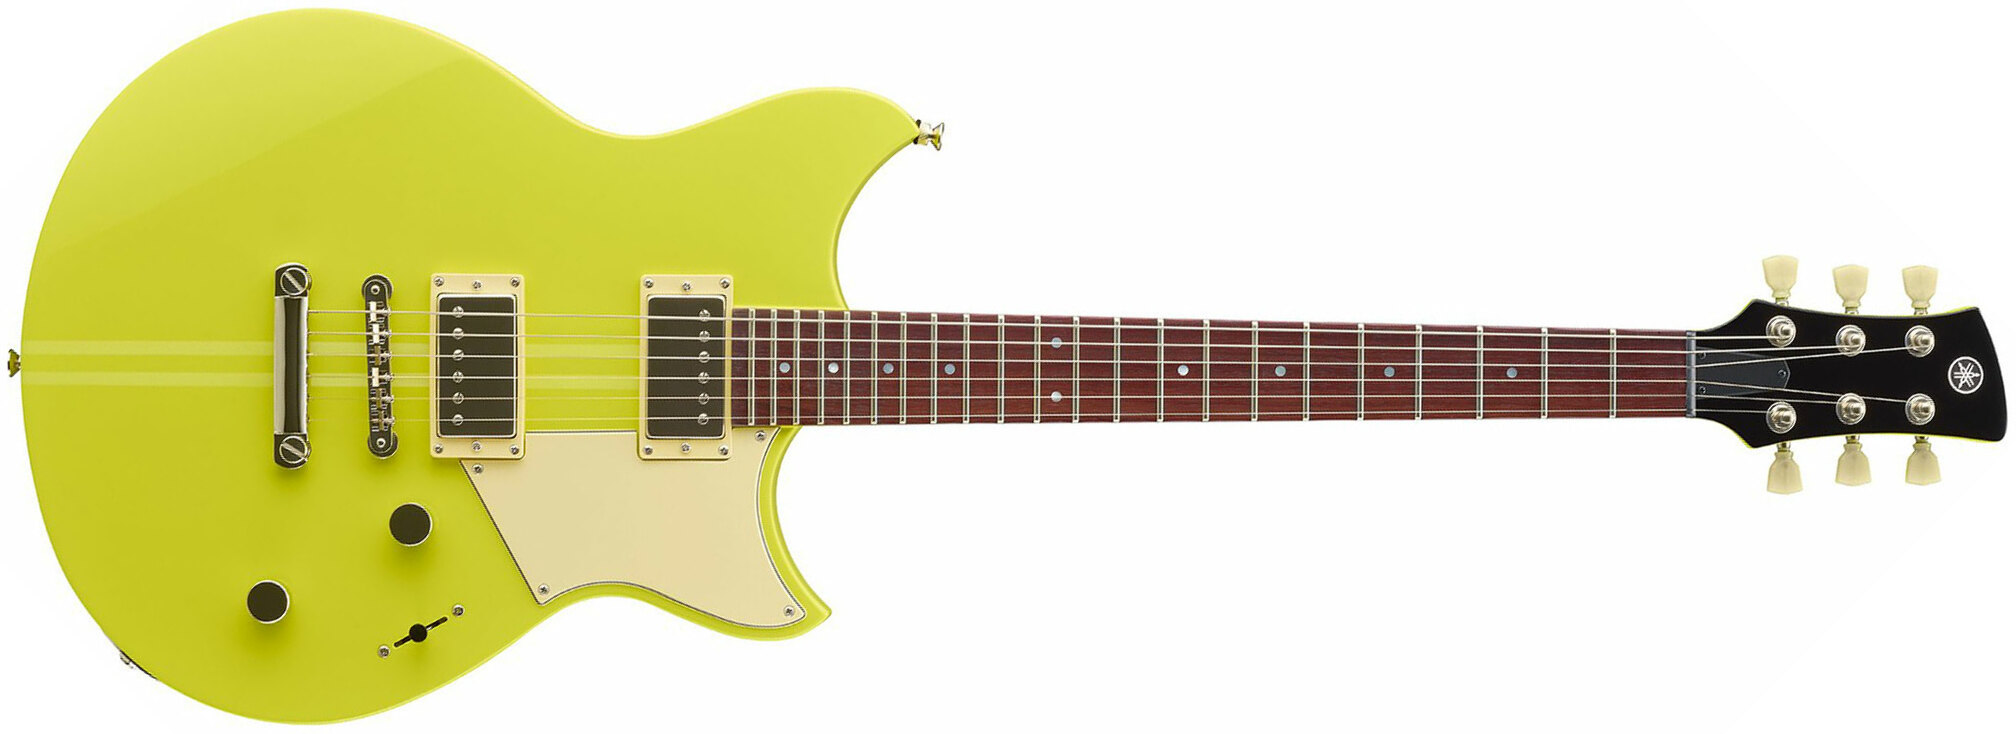 Yamaha Rse20 Revstar Element Hh Ht Rw - Neon Yellow - Double cut electric guitar - Main picture